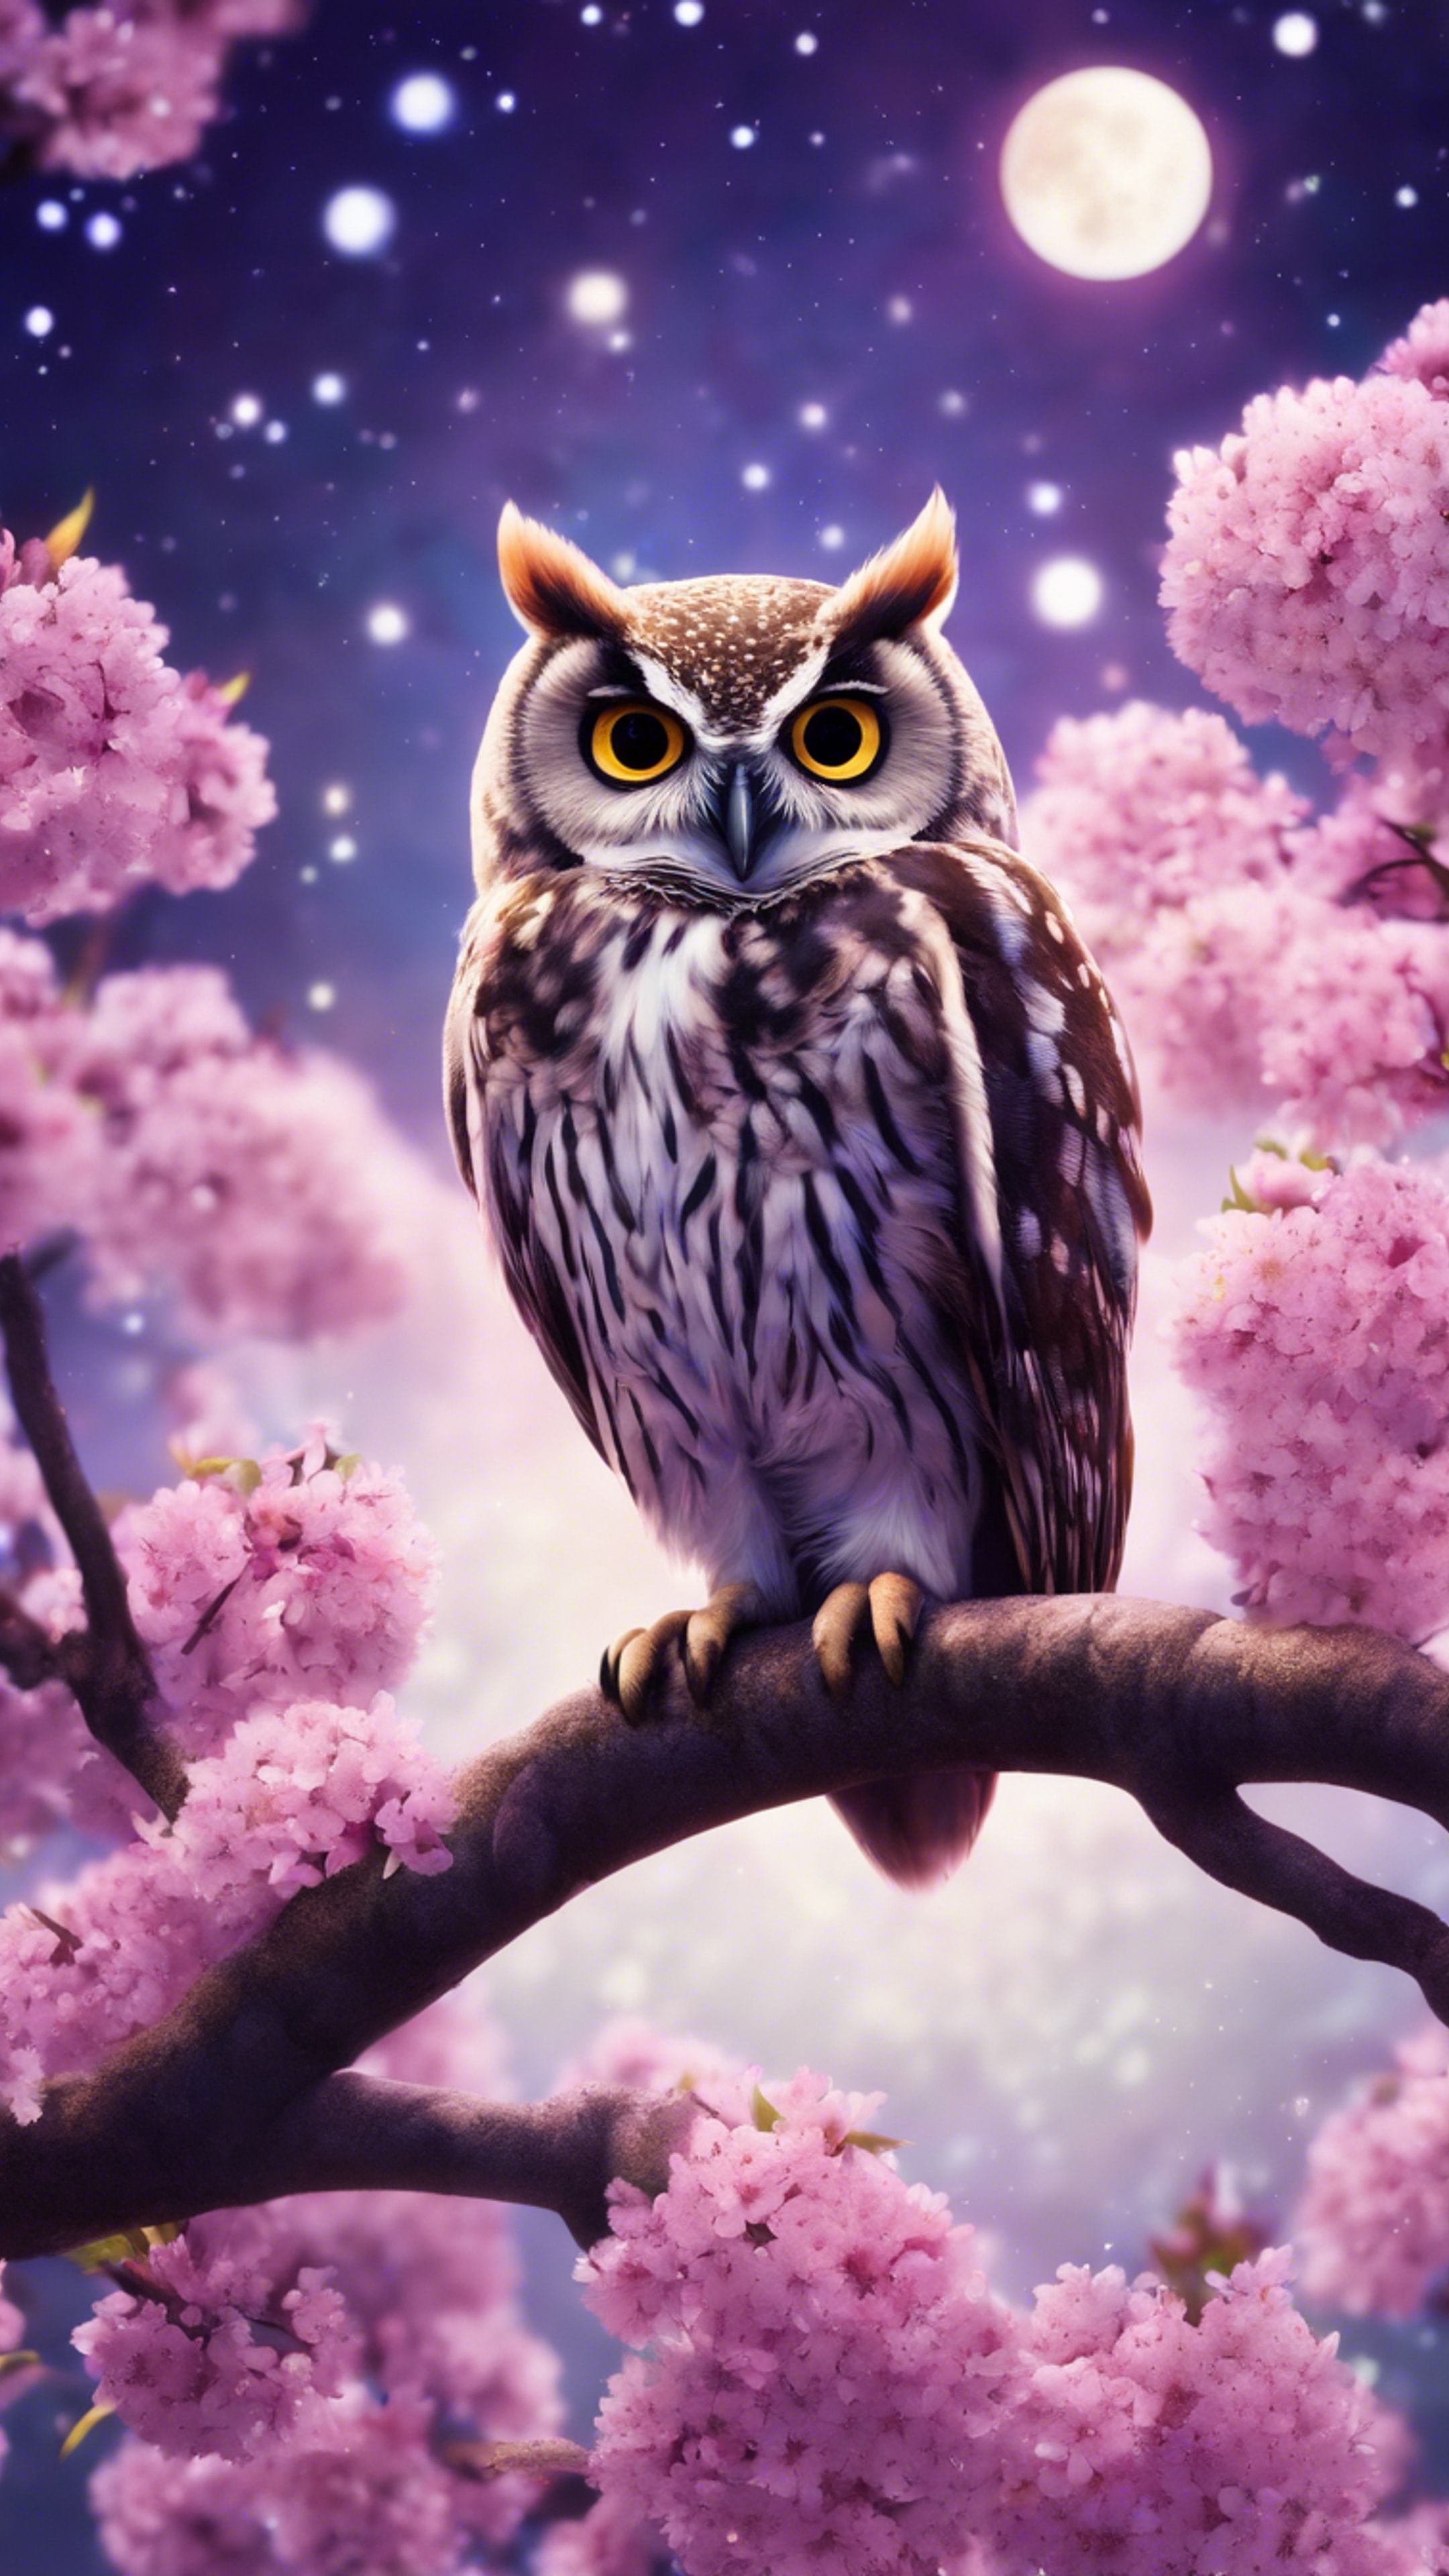 A cute kawaii style owl perched on a cherry blossom tree that blooms vibrant purple flowers, under a moonlit starry night. Sfondo[d4c437875b7e43ac9353]